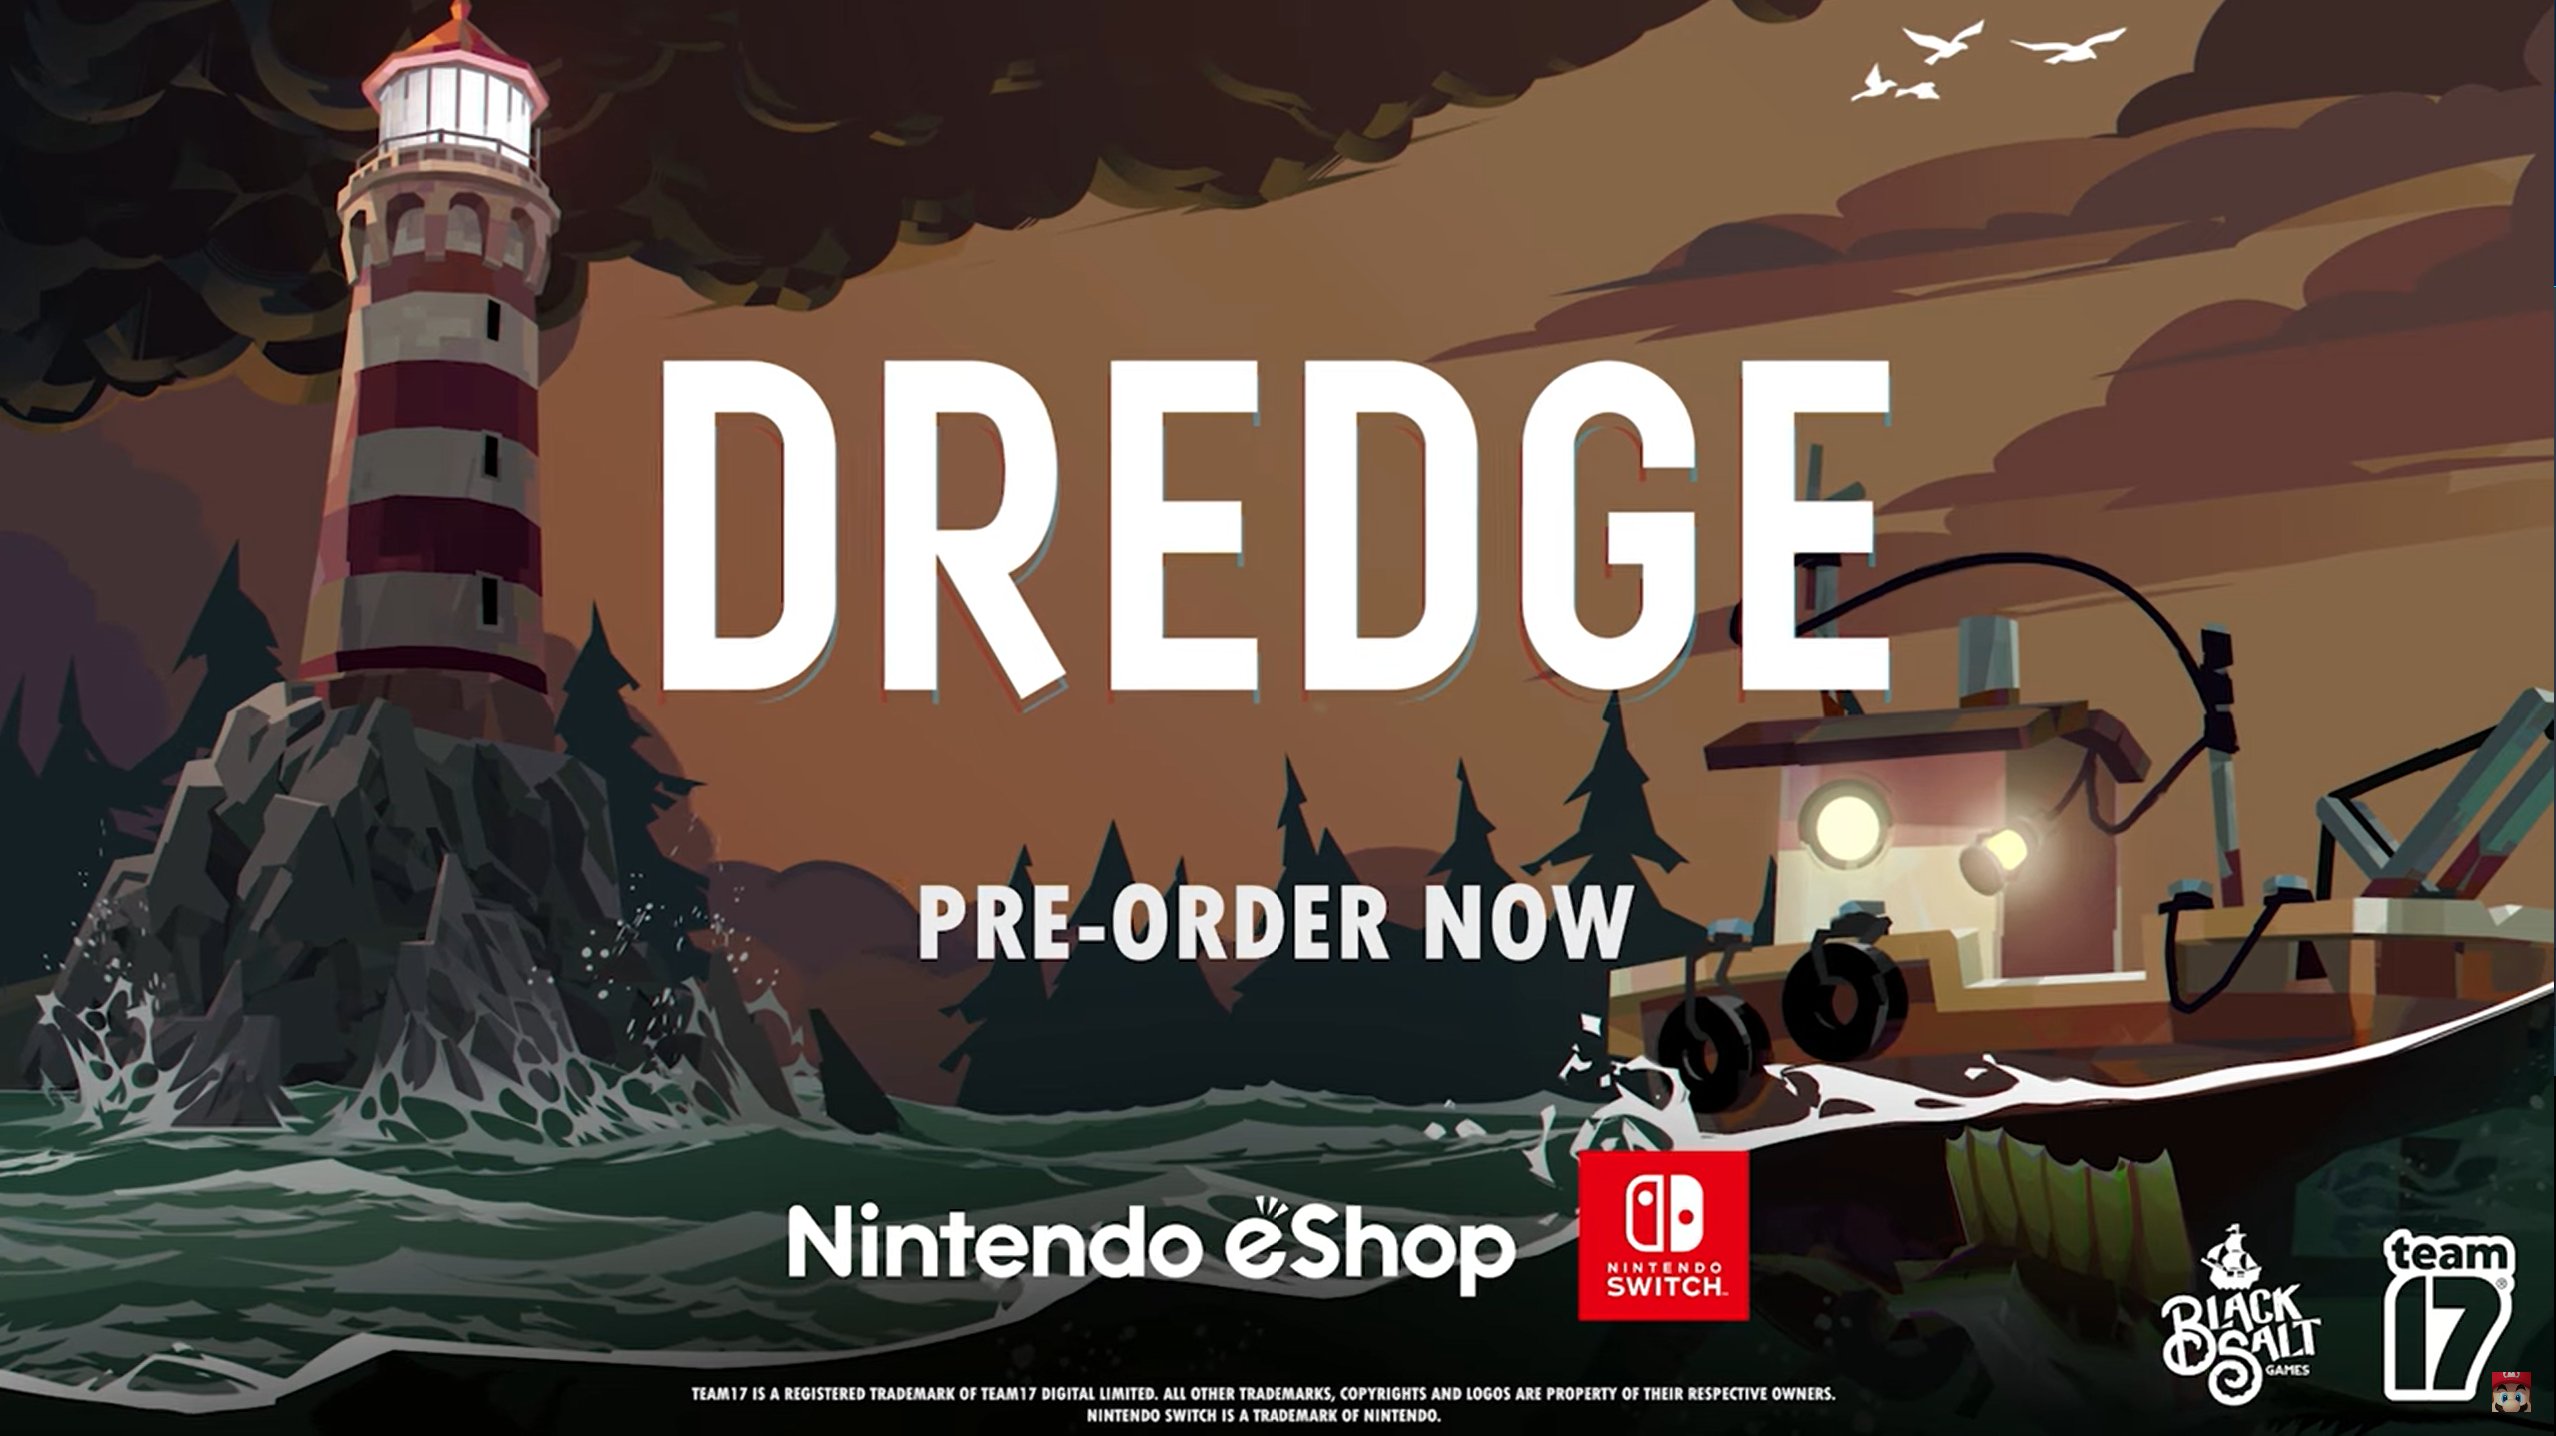 DREDGE on X: Those of you thinking of grabbing DREDGE on the  #NintendoSwitch will be please to know, the free demo is available right  now! Take DREDGE for a spin before our